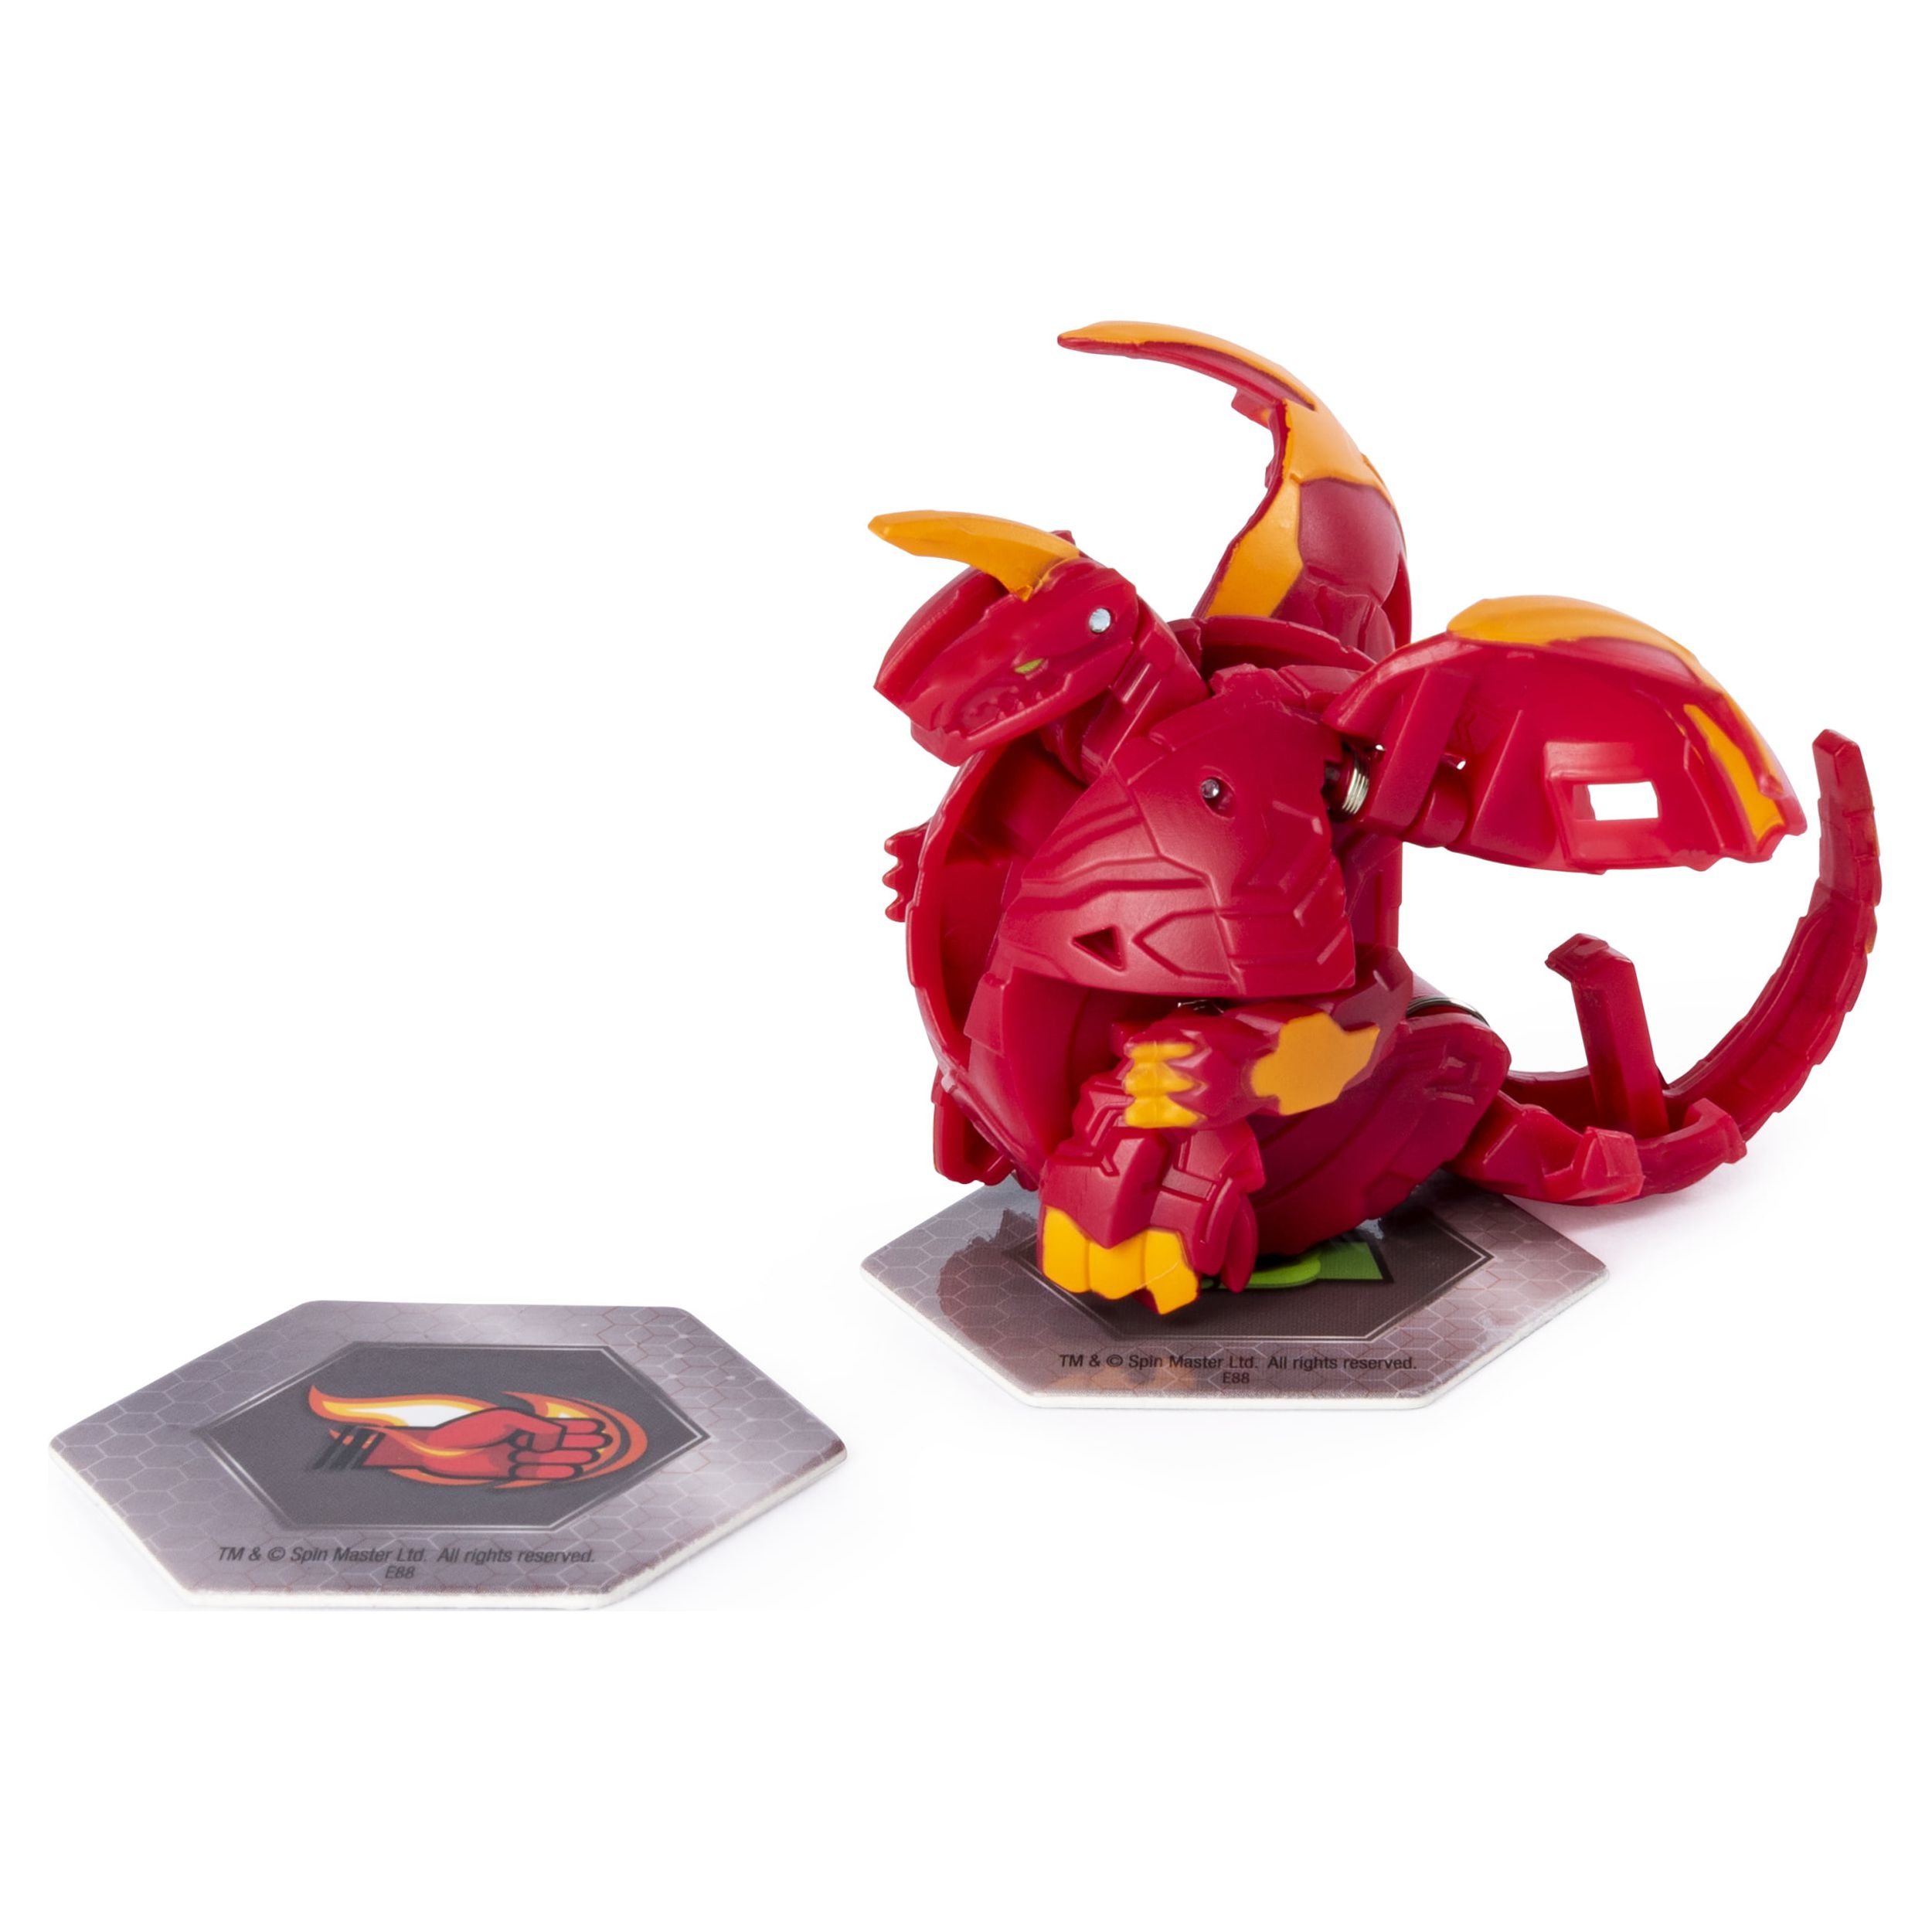 Bakugan, Dragonoid, 2-inch Tall Collectible Action Figure and Trading Card, for Ages 6 and Up - image 3 of 5